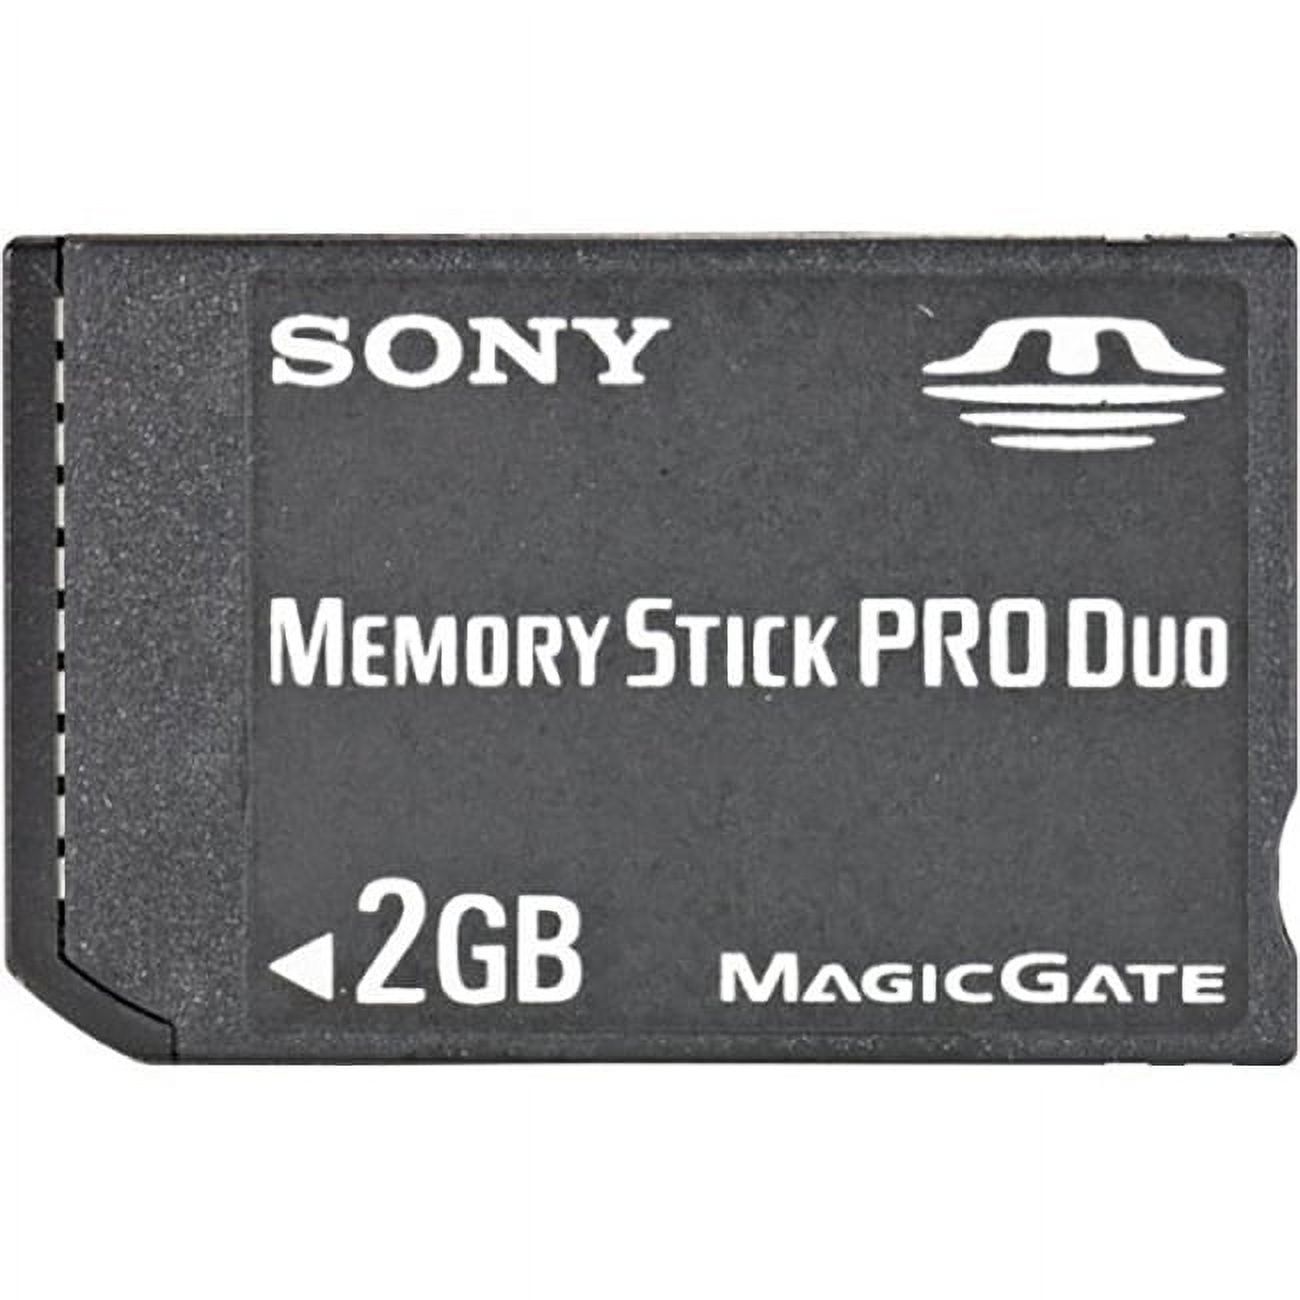 OEM Memory Stick PRO Duo 1GB 2GB 4GB 8GB Card for PSP Wii - China